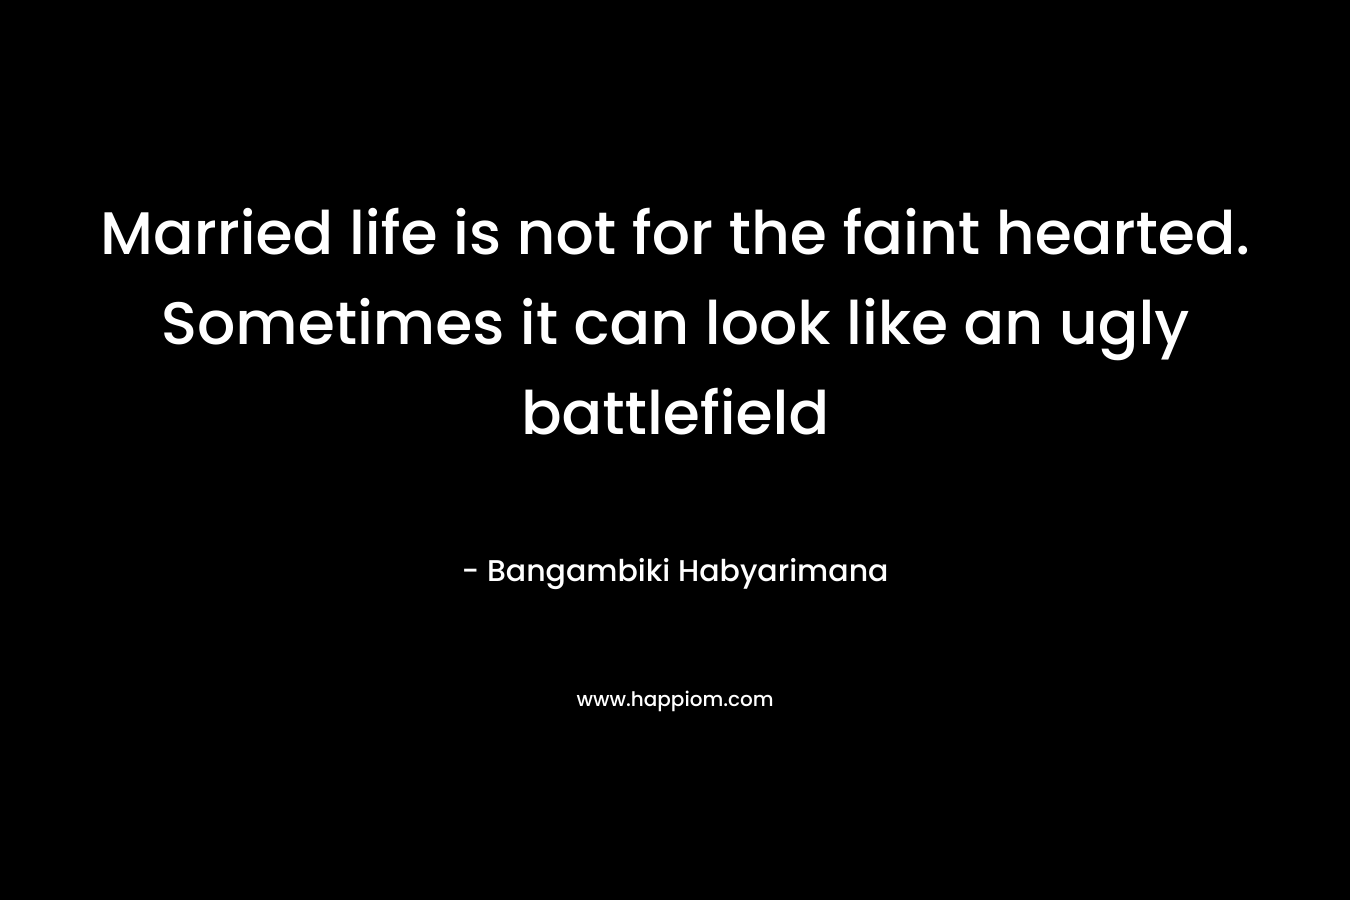 Married life is not for the faint hearted. Sometimes it can look like an ugly battlefield – Bangambiki Habyarimana